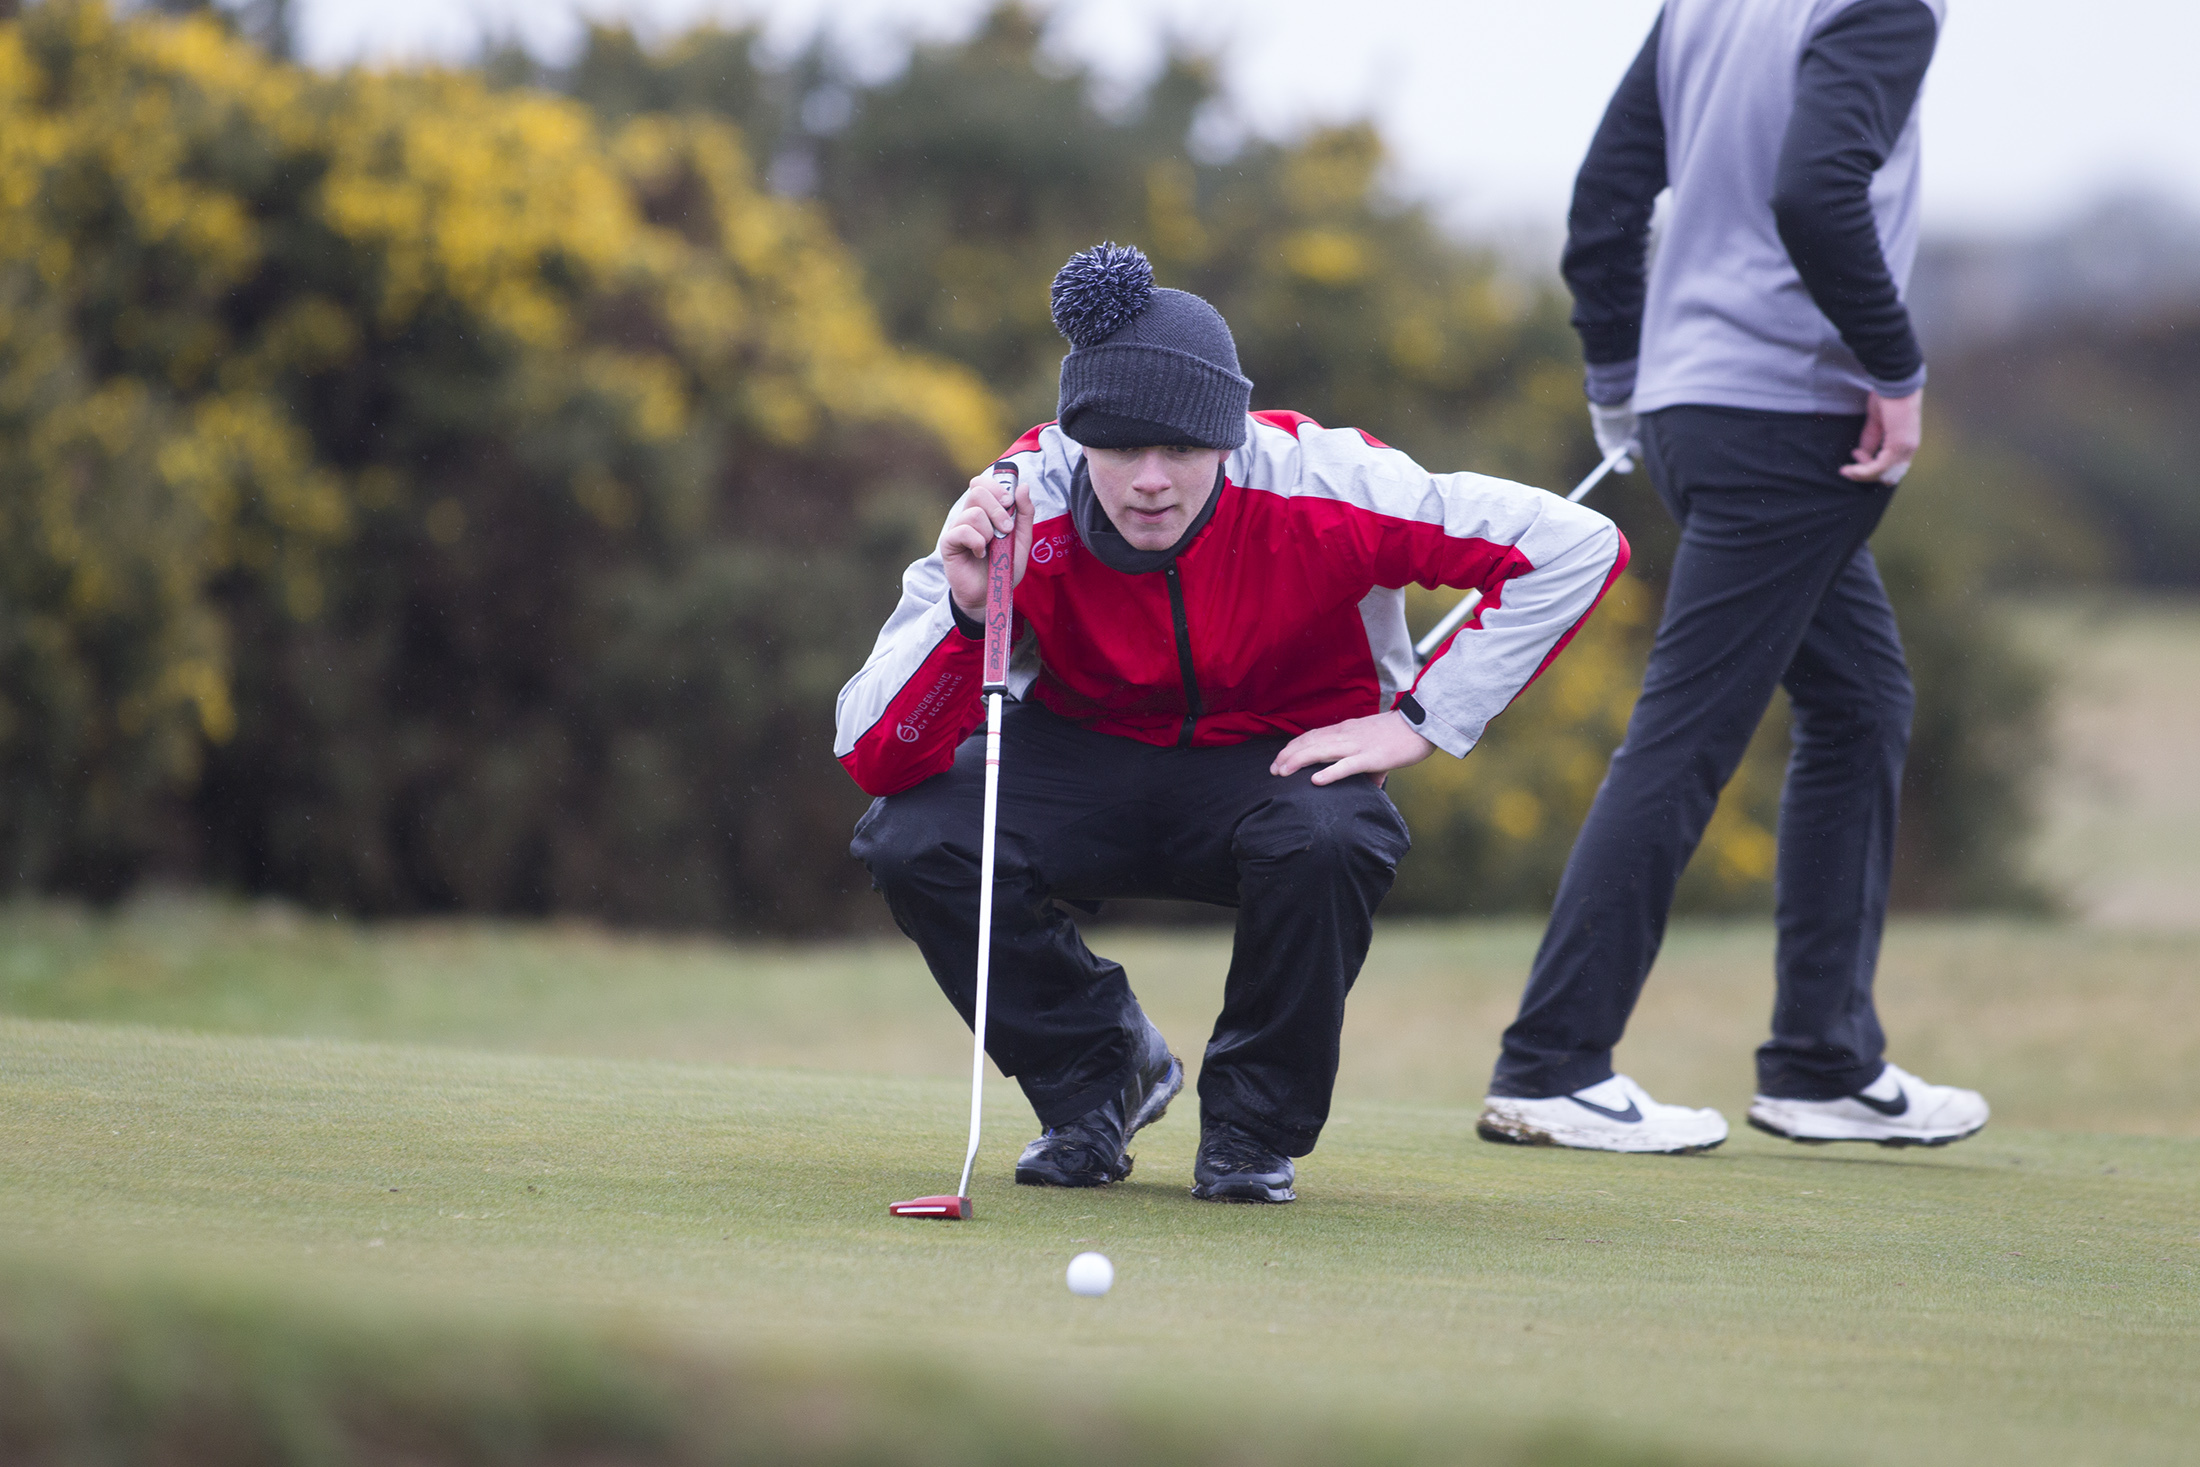 Sean Logue of Royal Montrose  was the highest placed local player on the opening day of the Scottish Boys'.